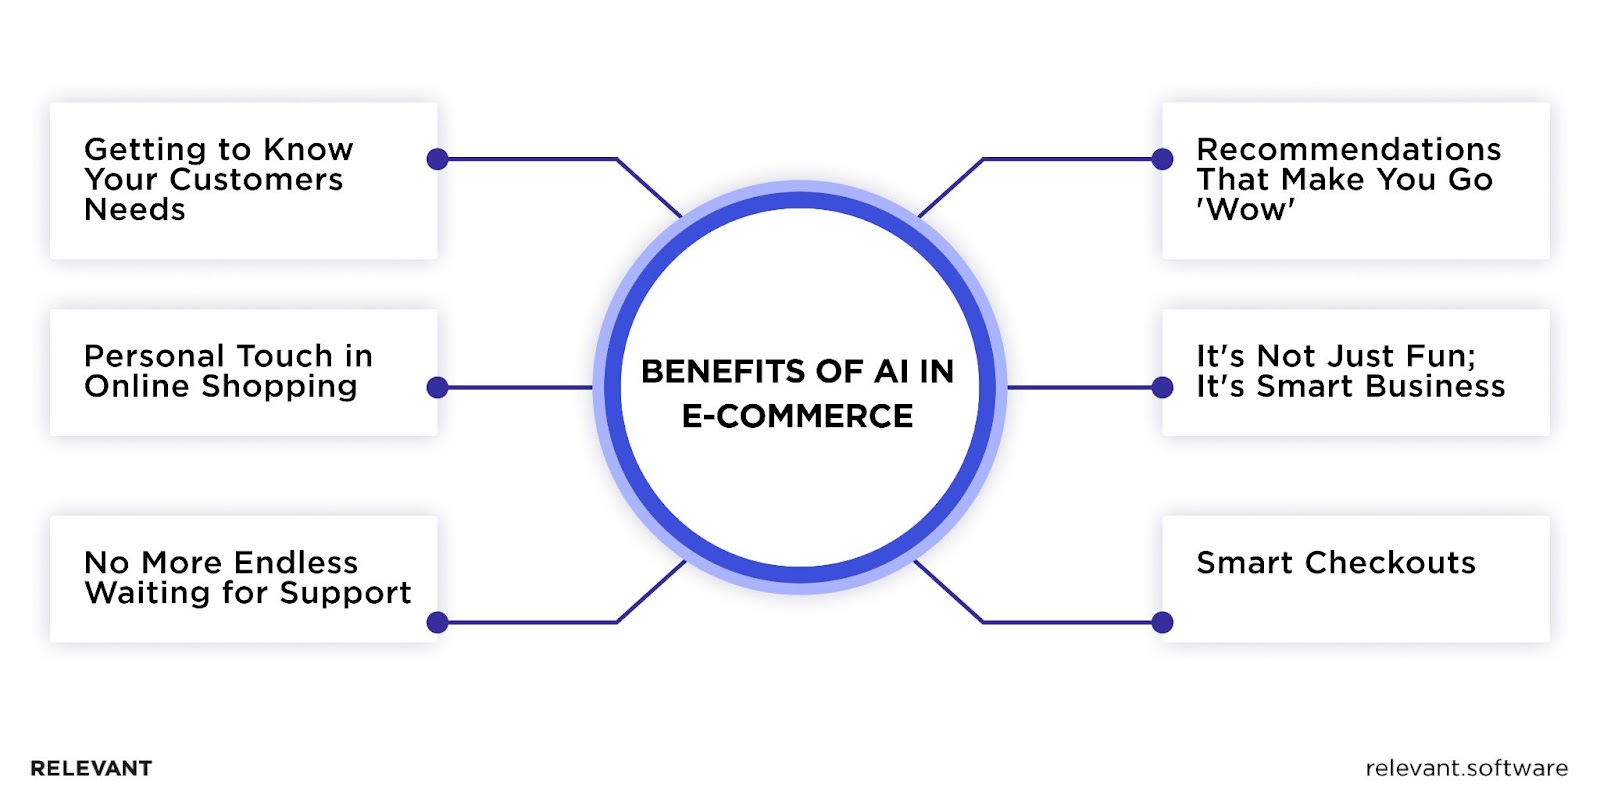 Benefits of AI in E-commerce